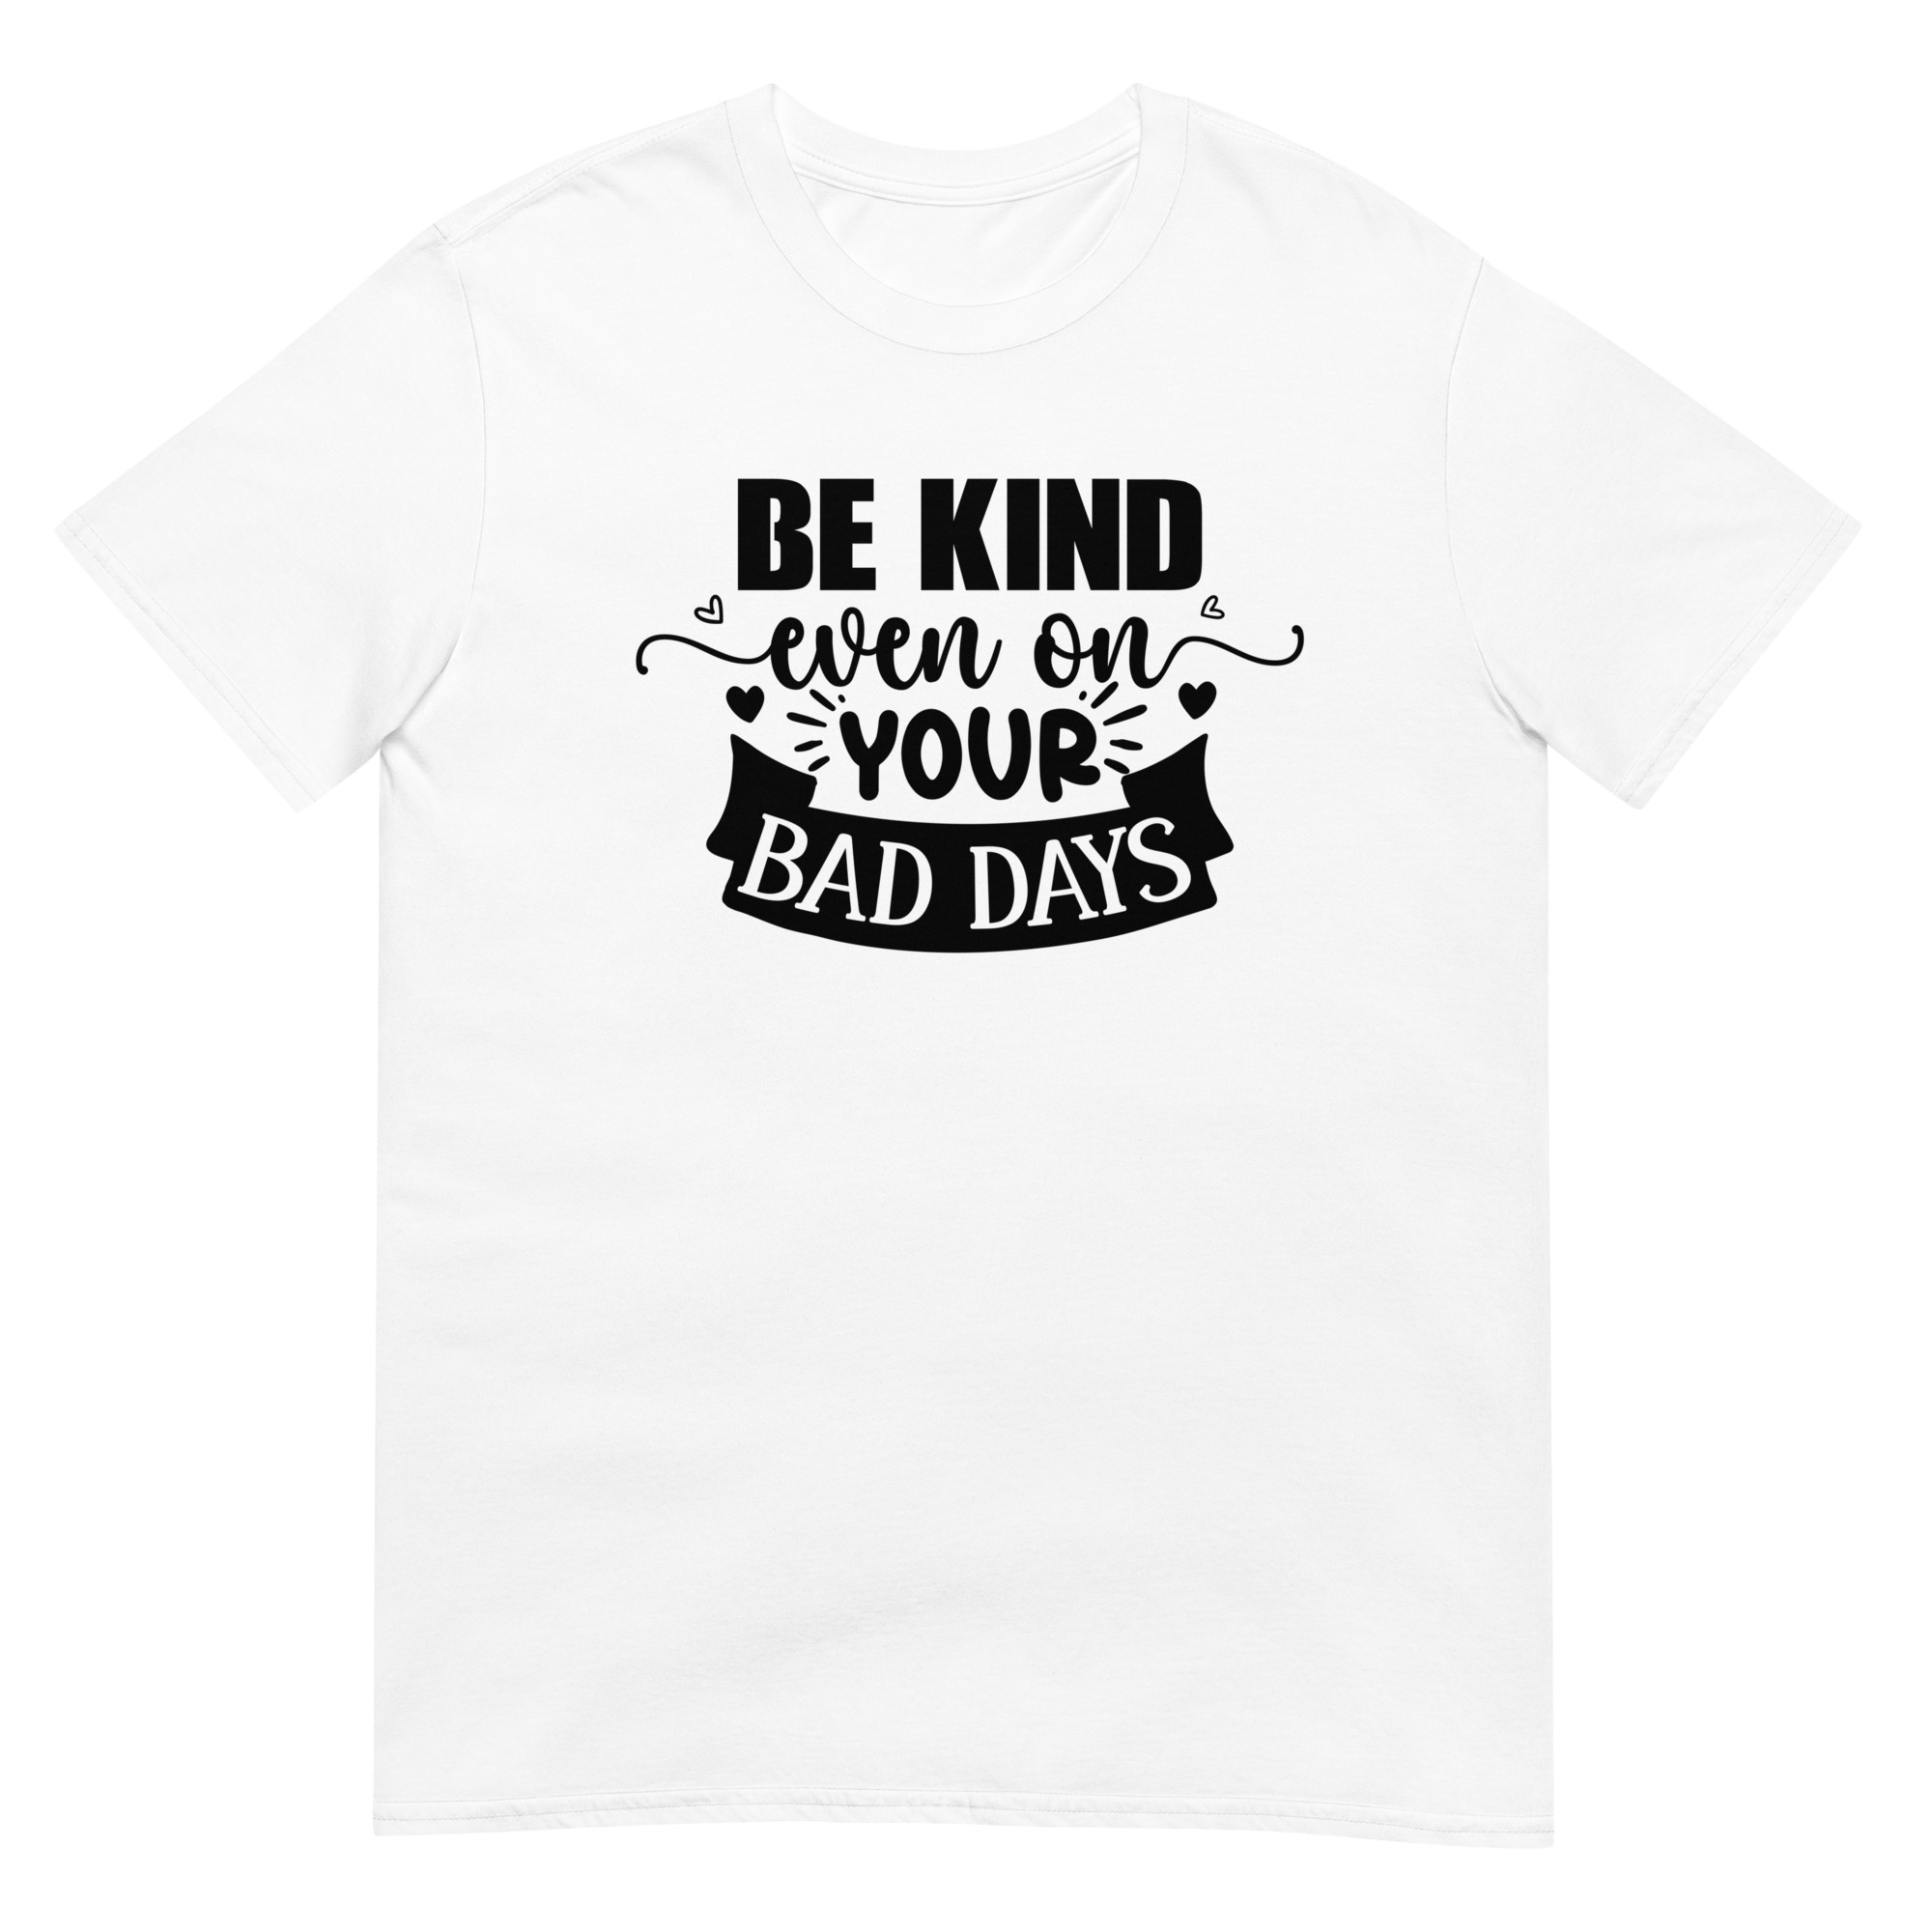 Be Kind Even On Your Bad Days - Unisex Motivational Quote T-Shirt